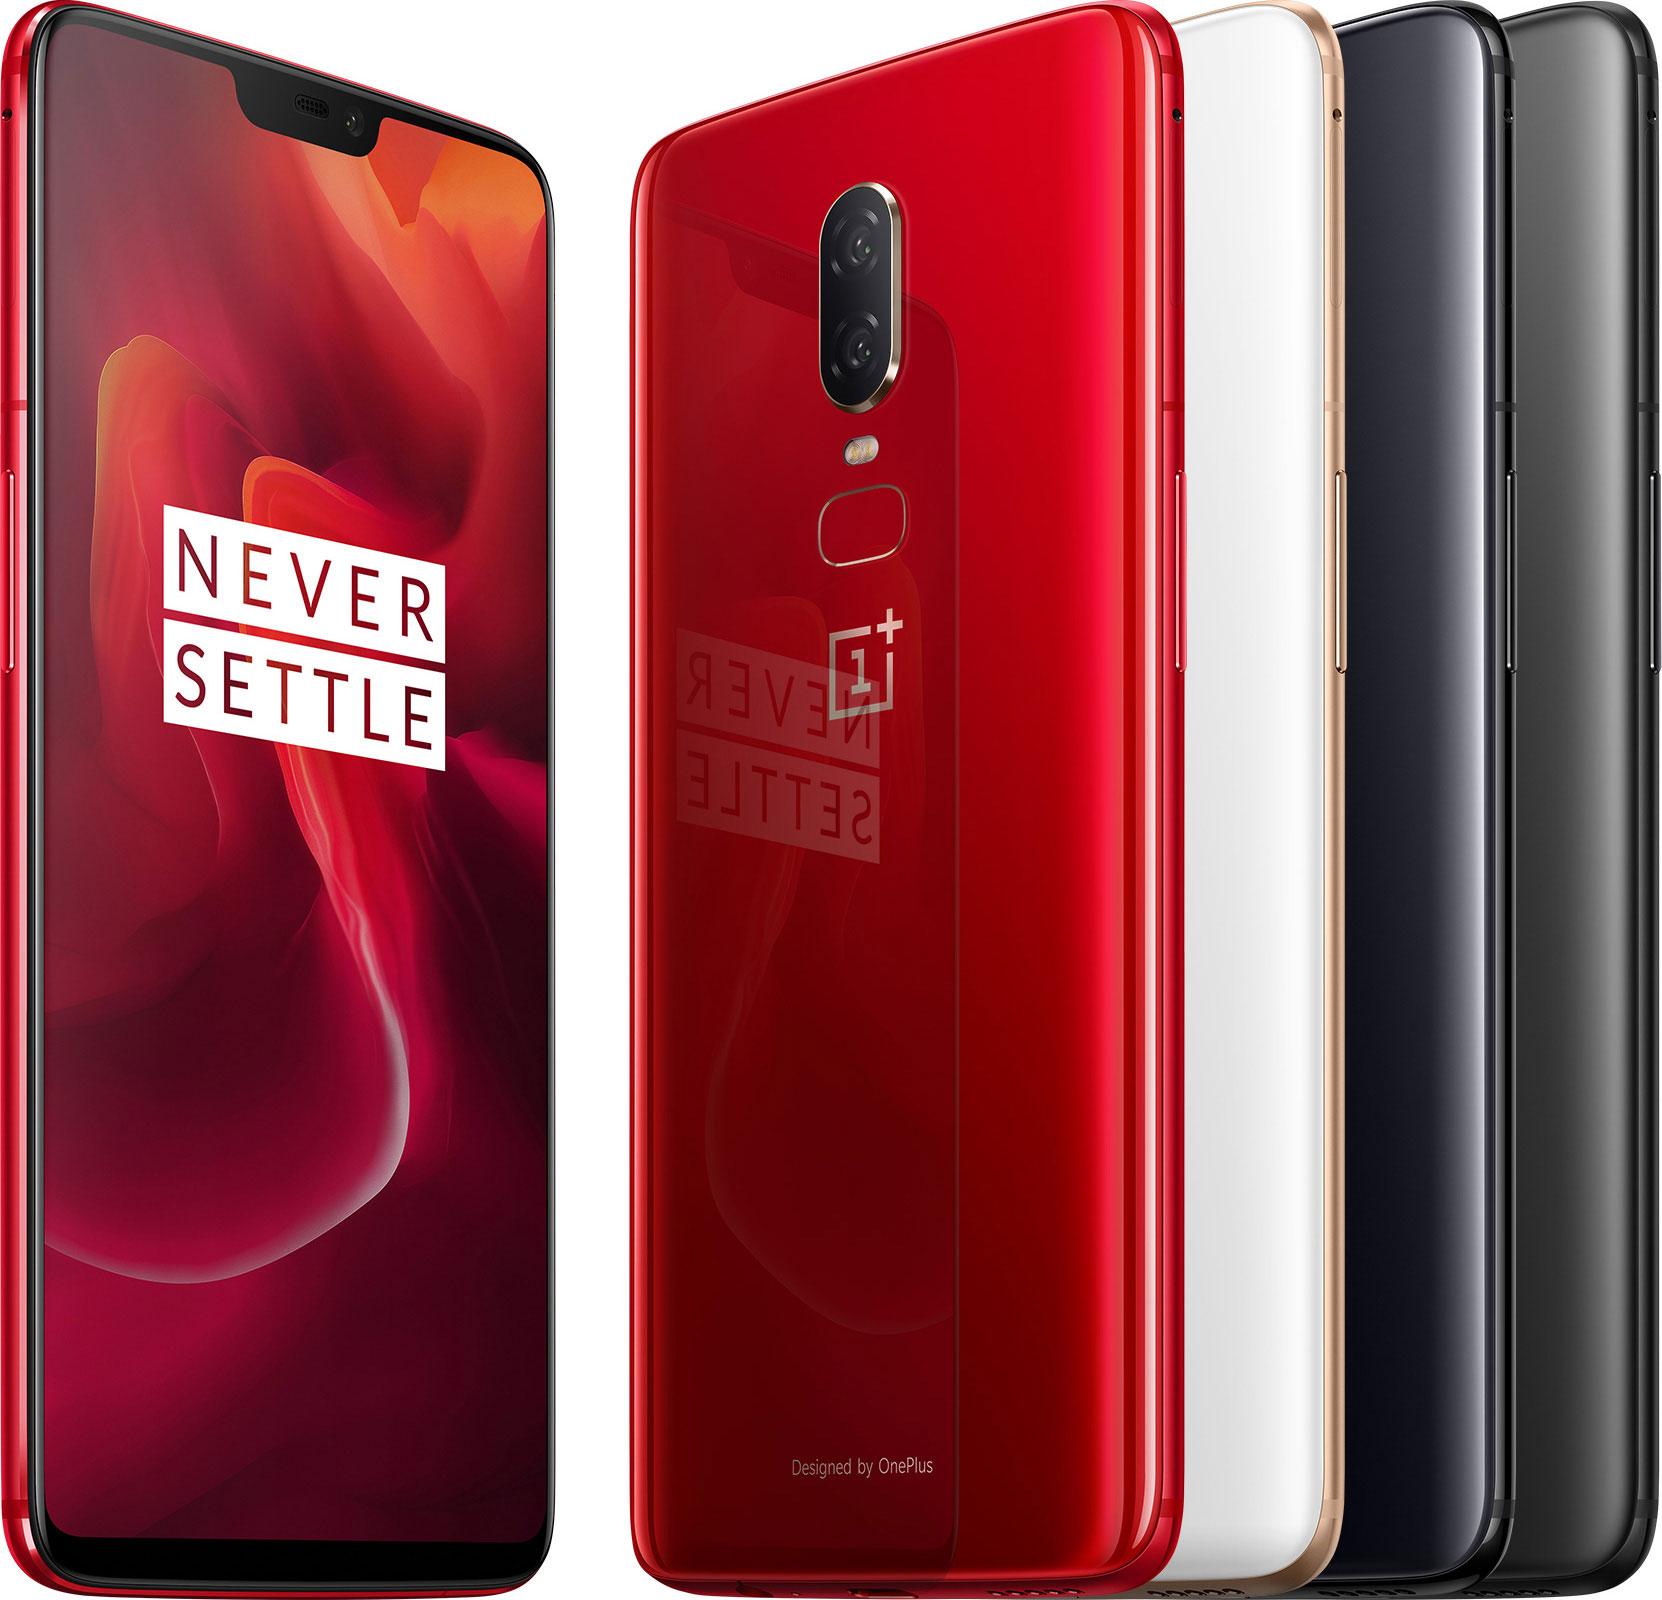 Flaunt Your Style with OnePlus 6 Red & Silk White Edition